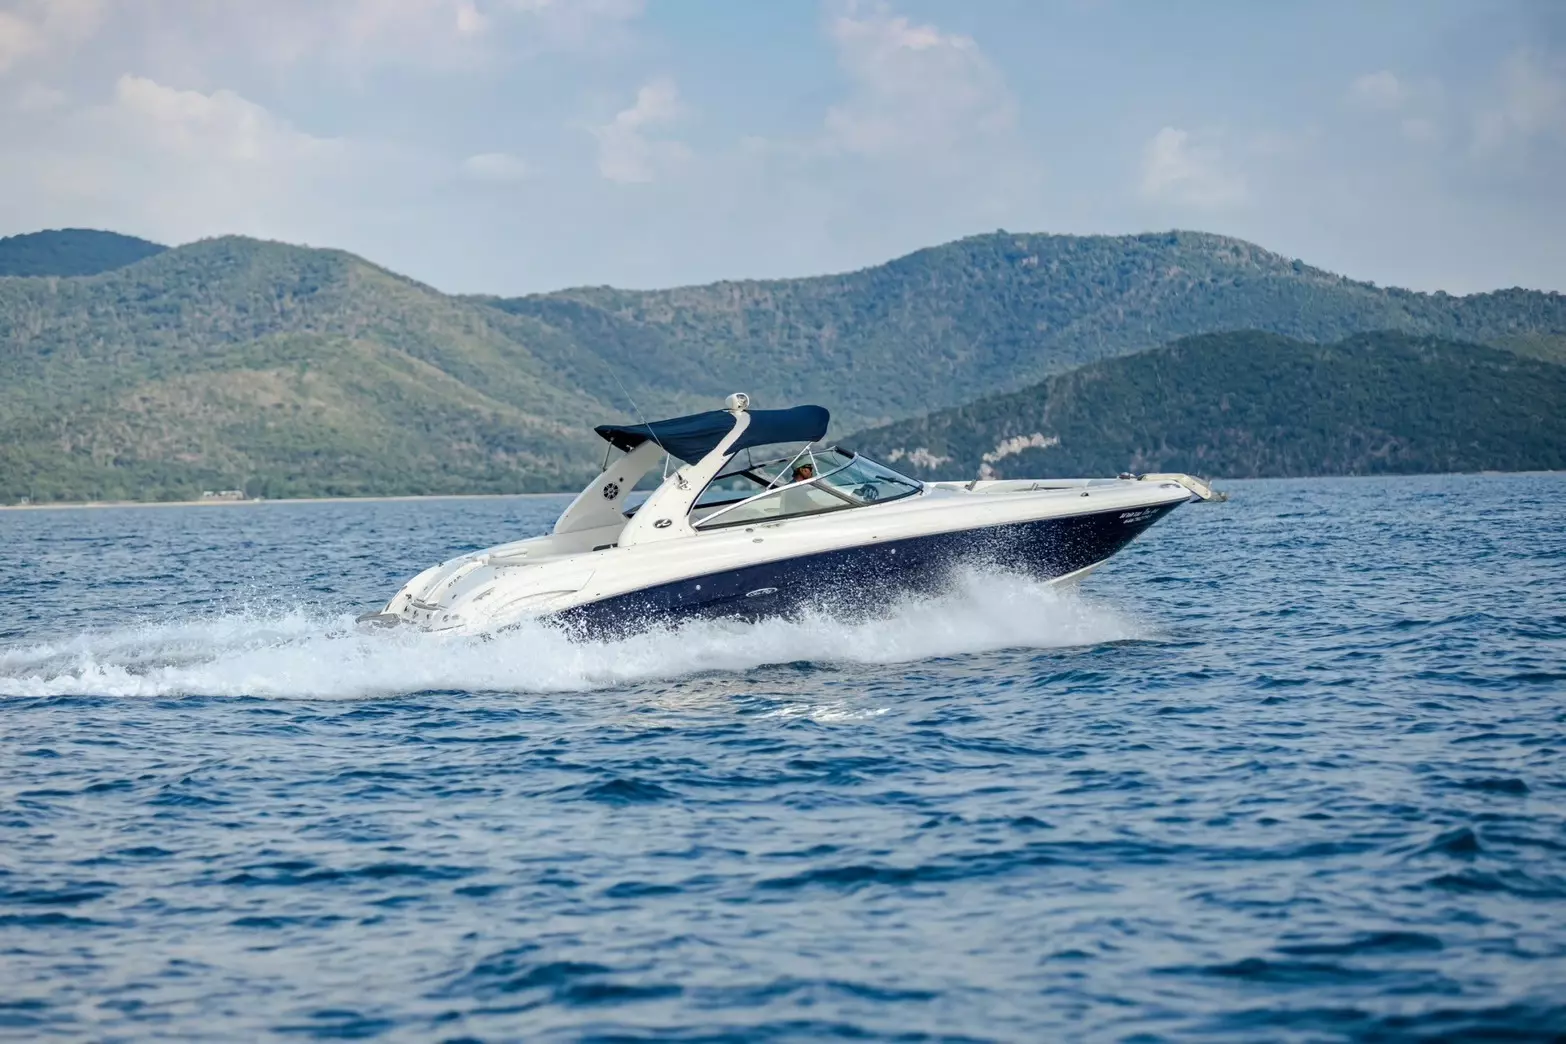 Madam Ho by Sea Ray - Top rates for a Charter of a private Power Boat in Thailand